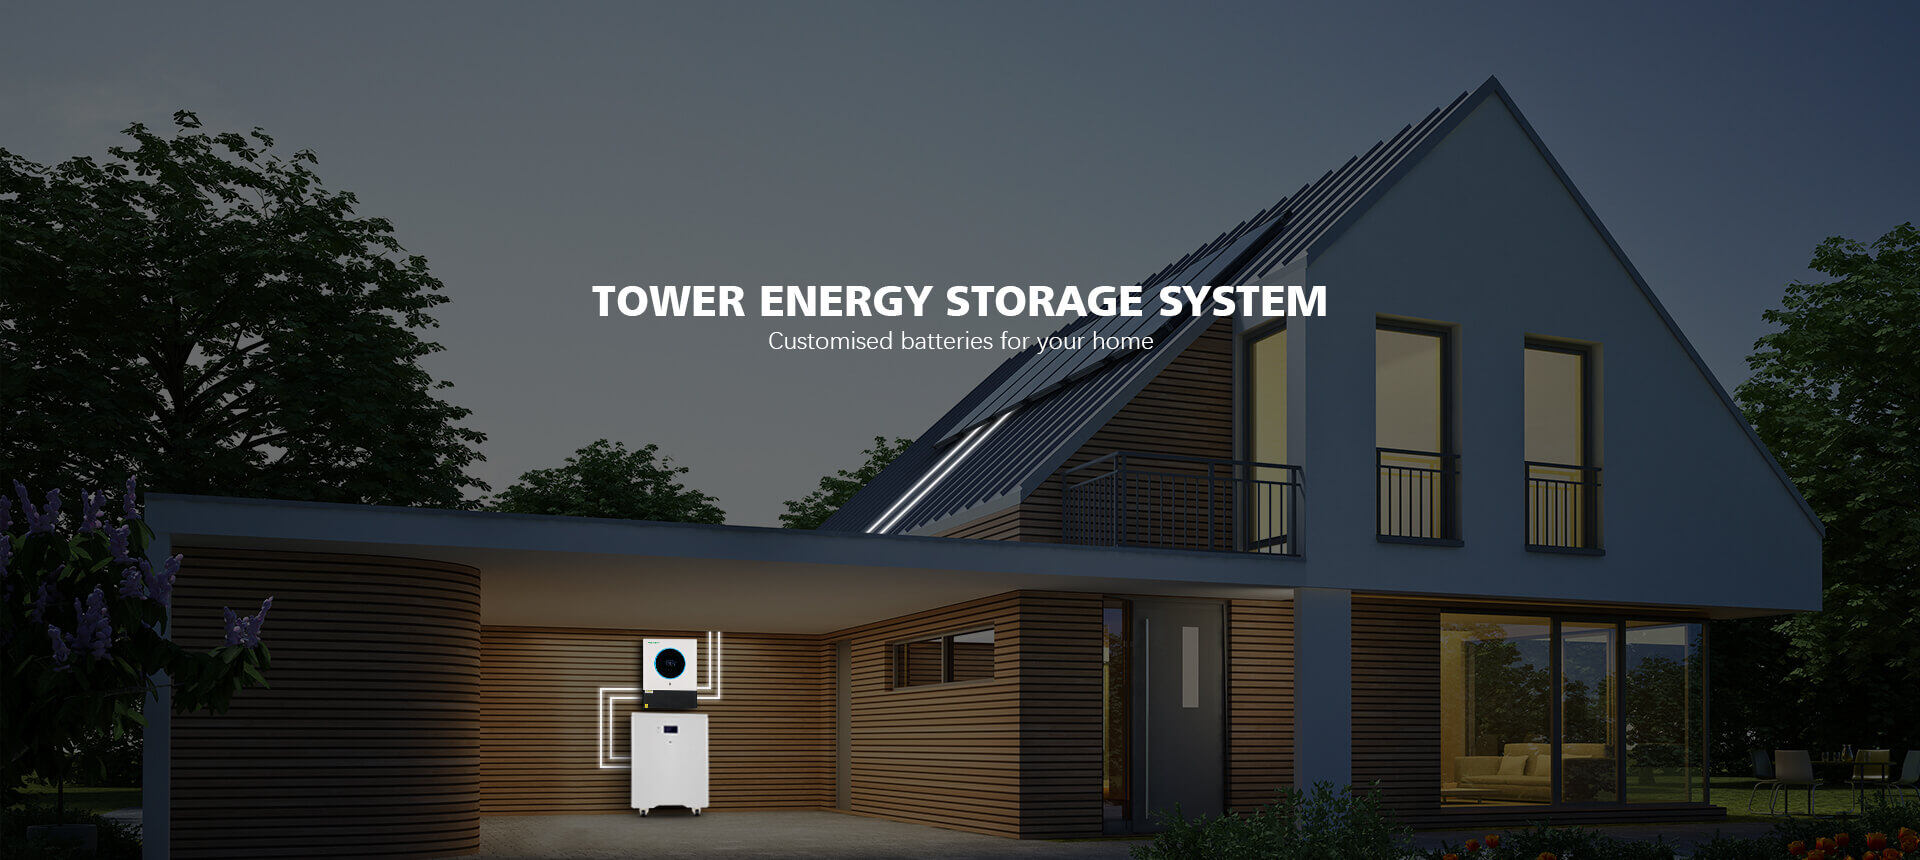 Tower Energy Storage System